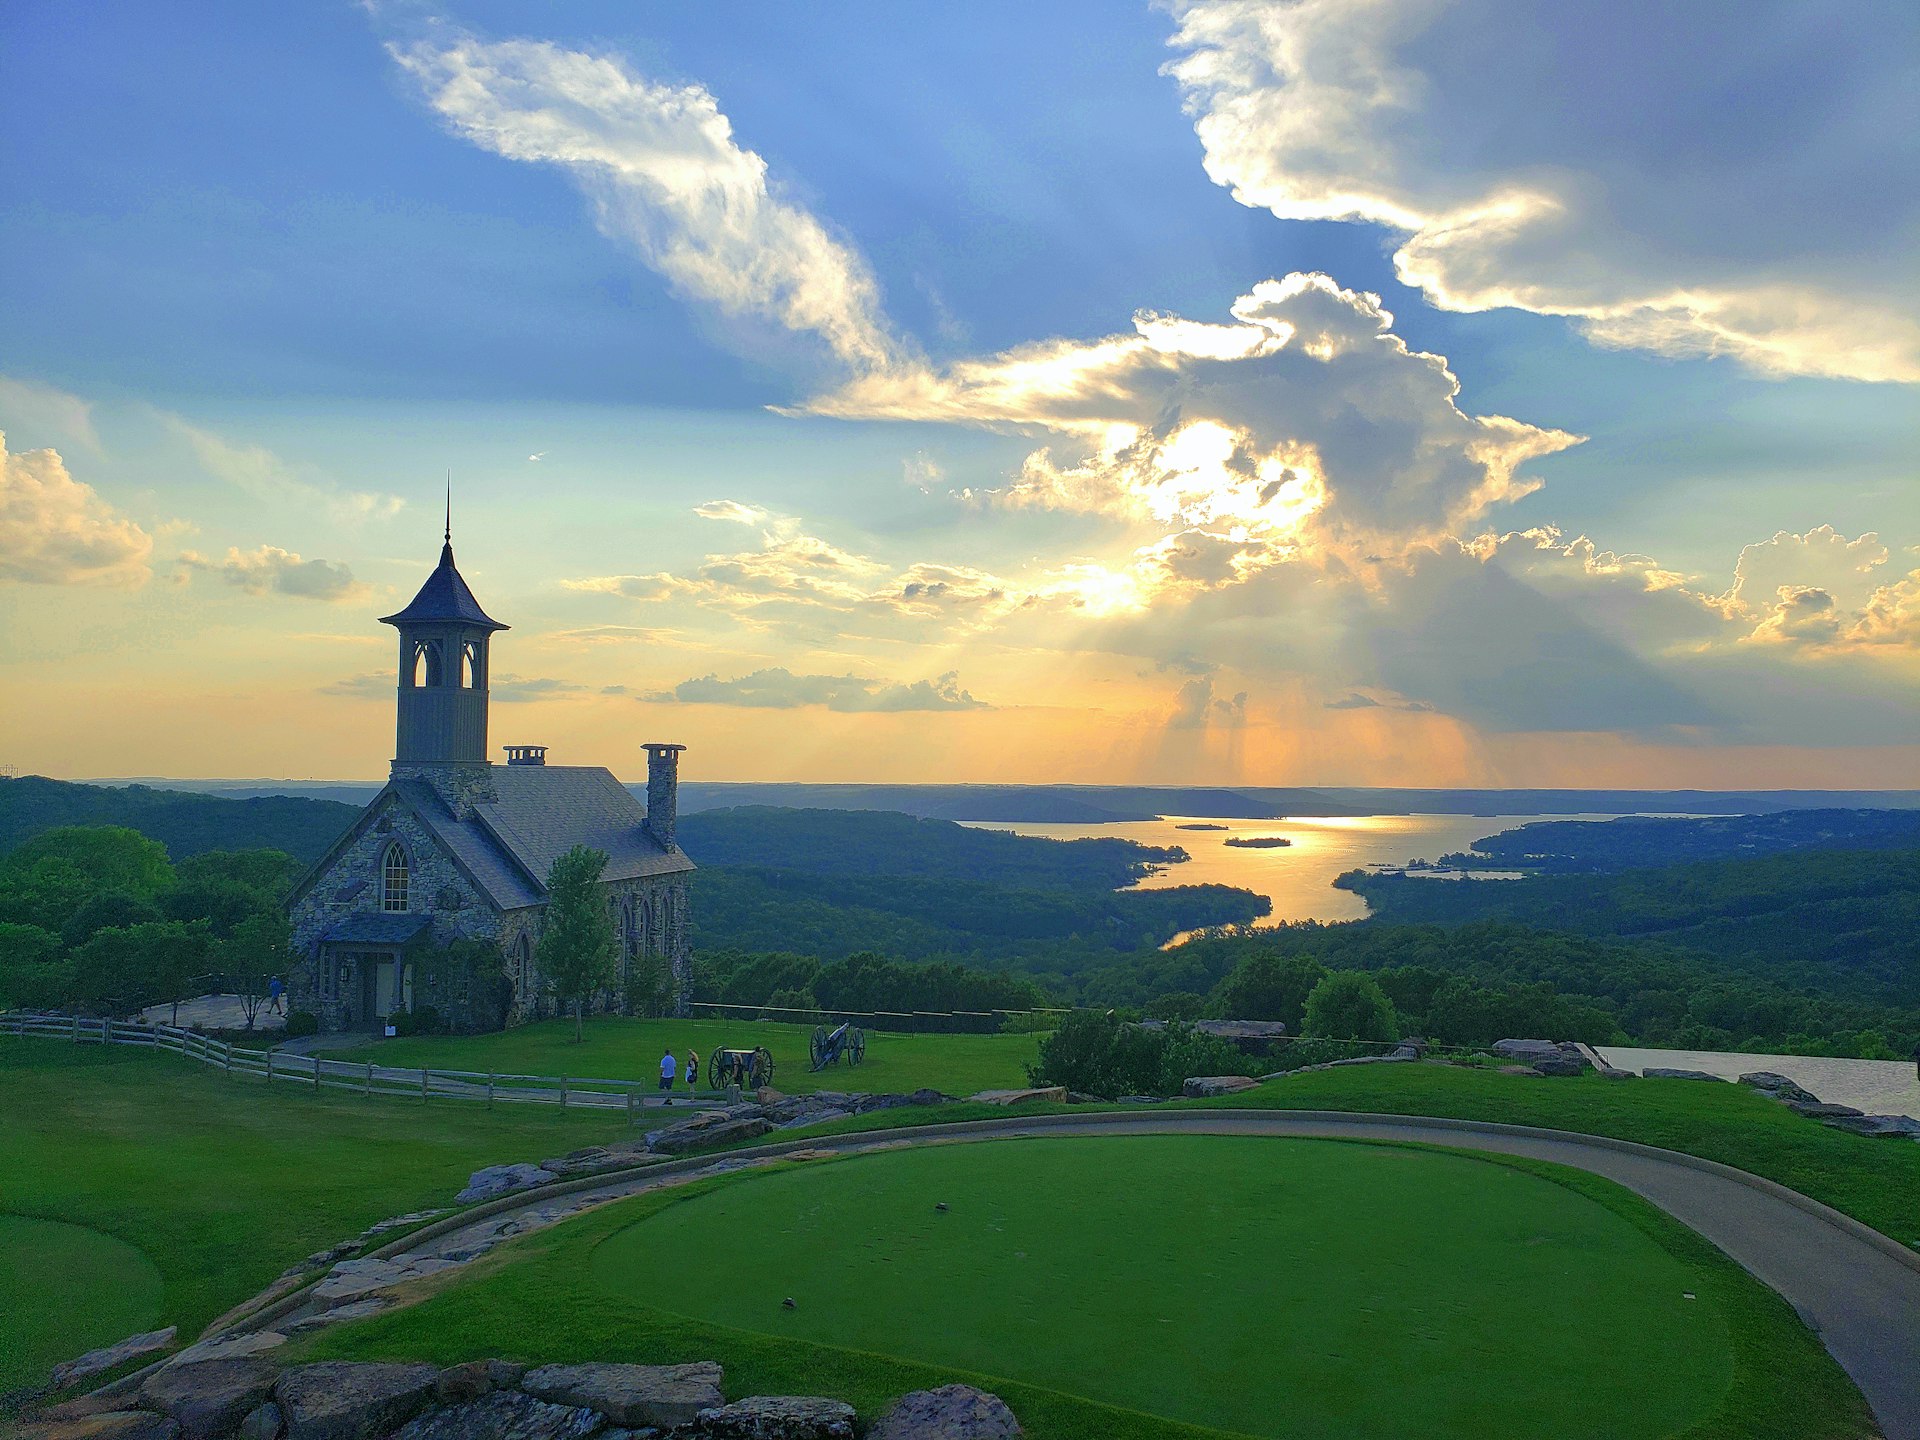 Chapel of the Ozarks in Branson, Missouri at Sunset with Table Rock Lake in the background